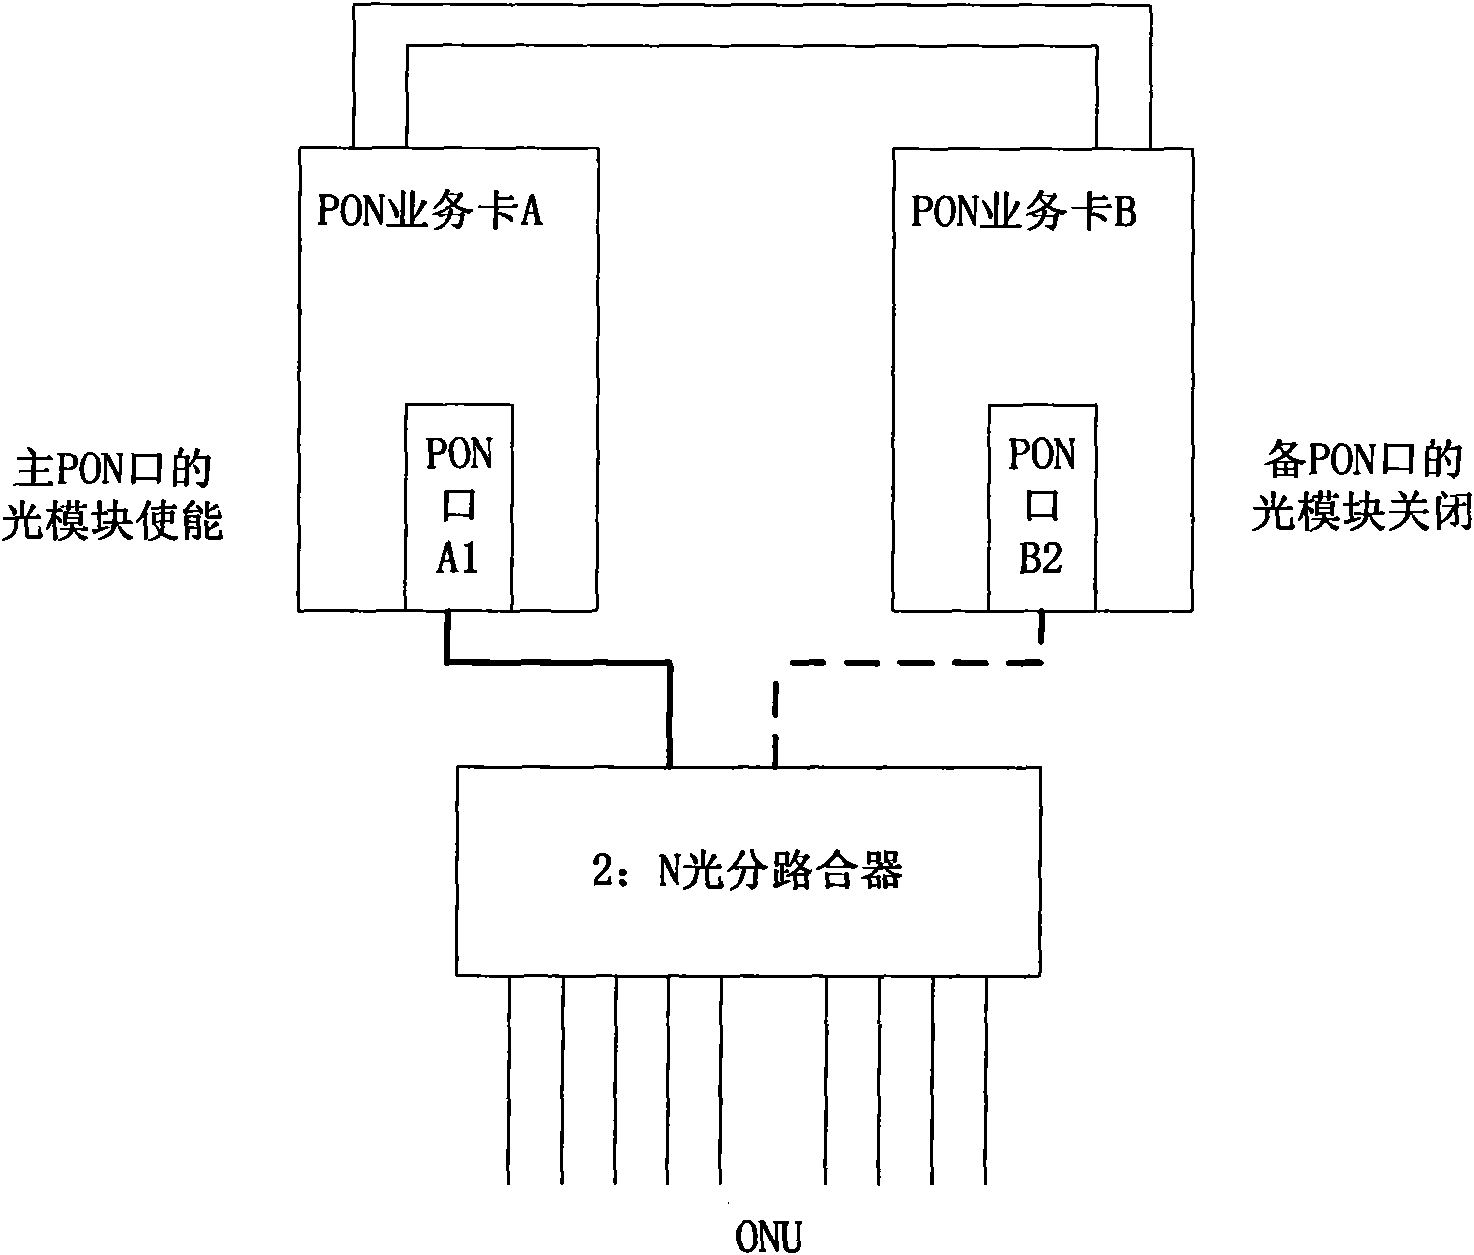 Method and device for rapid protection switching of passive optical network (PON) ports in any slot position in 10 Gbit/s Ethernet PON (10G-EPON) system